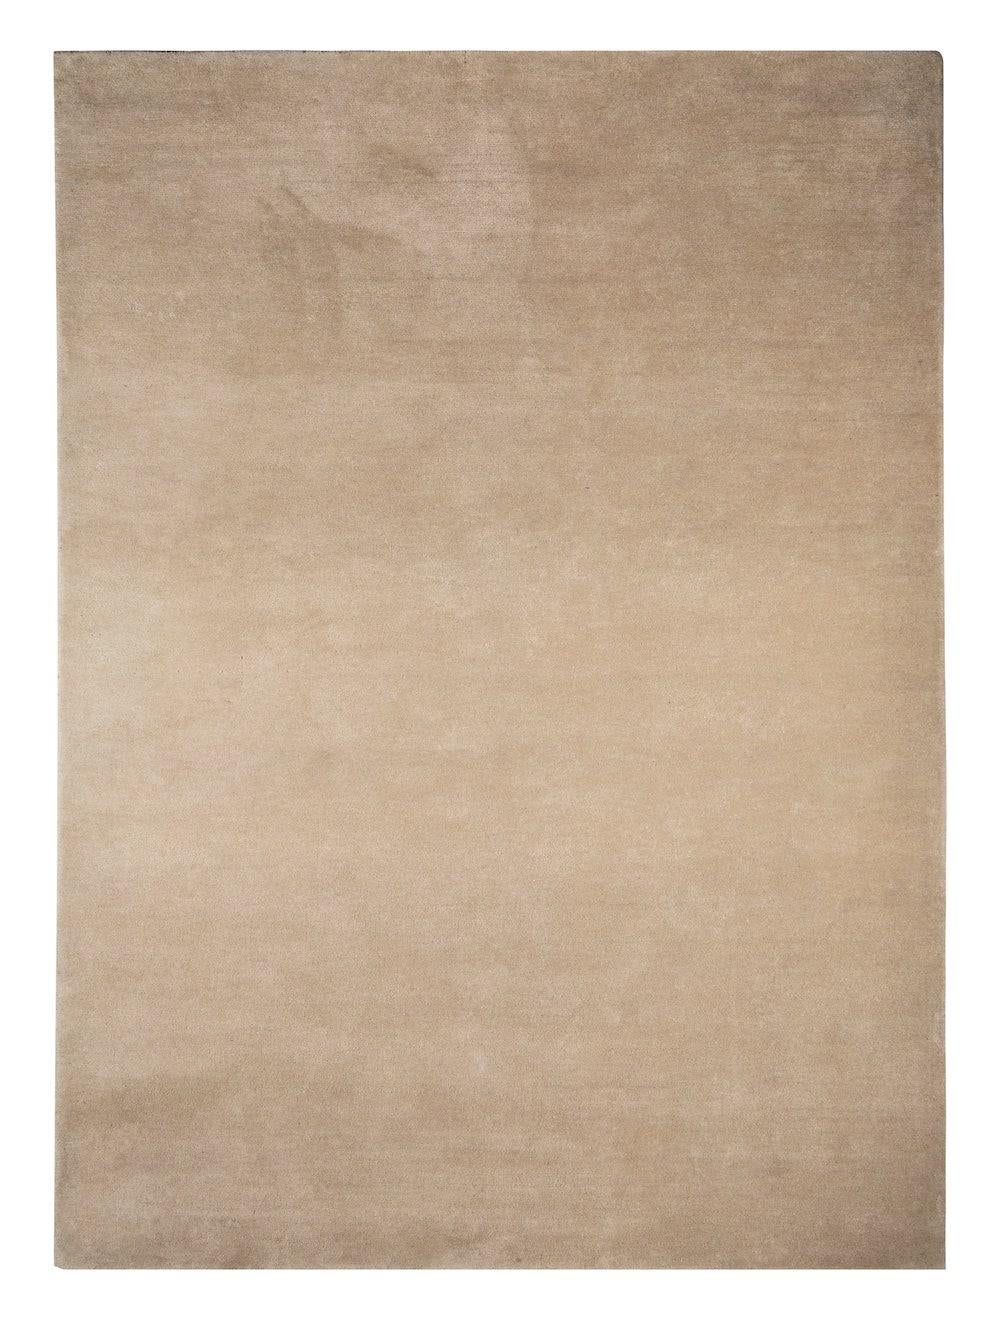 Beige repeat carpet by Massimo Copenhagen.
Handtufted
Materials: 100% recycled PET, cotton.
Dimensions: W 250 x H 350 cm.
Available colors: graphite, cream, beige, pistachio, and pastel yellow.. 
Other dimensions are available: 160 x 230 cm,